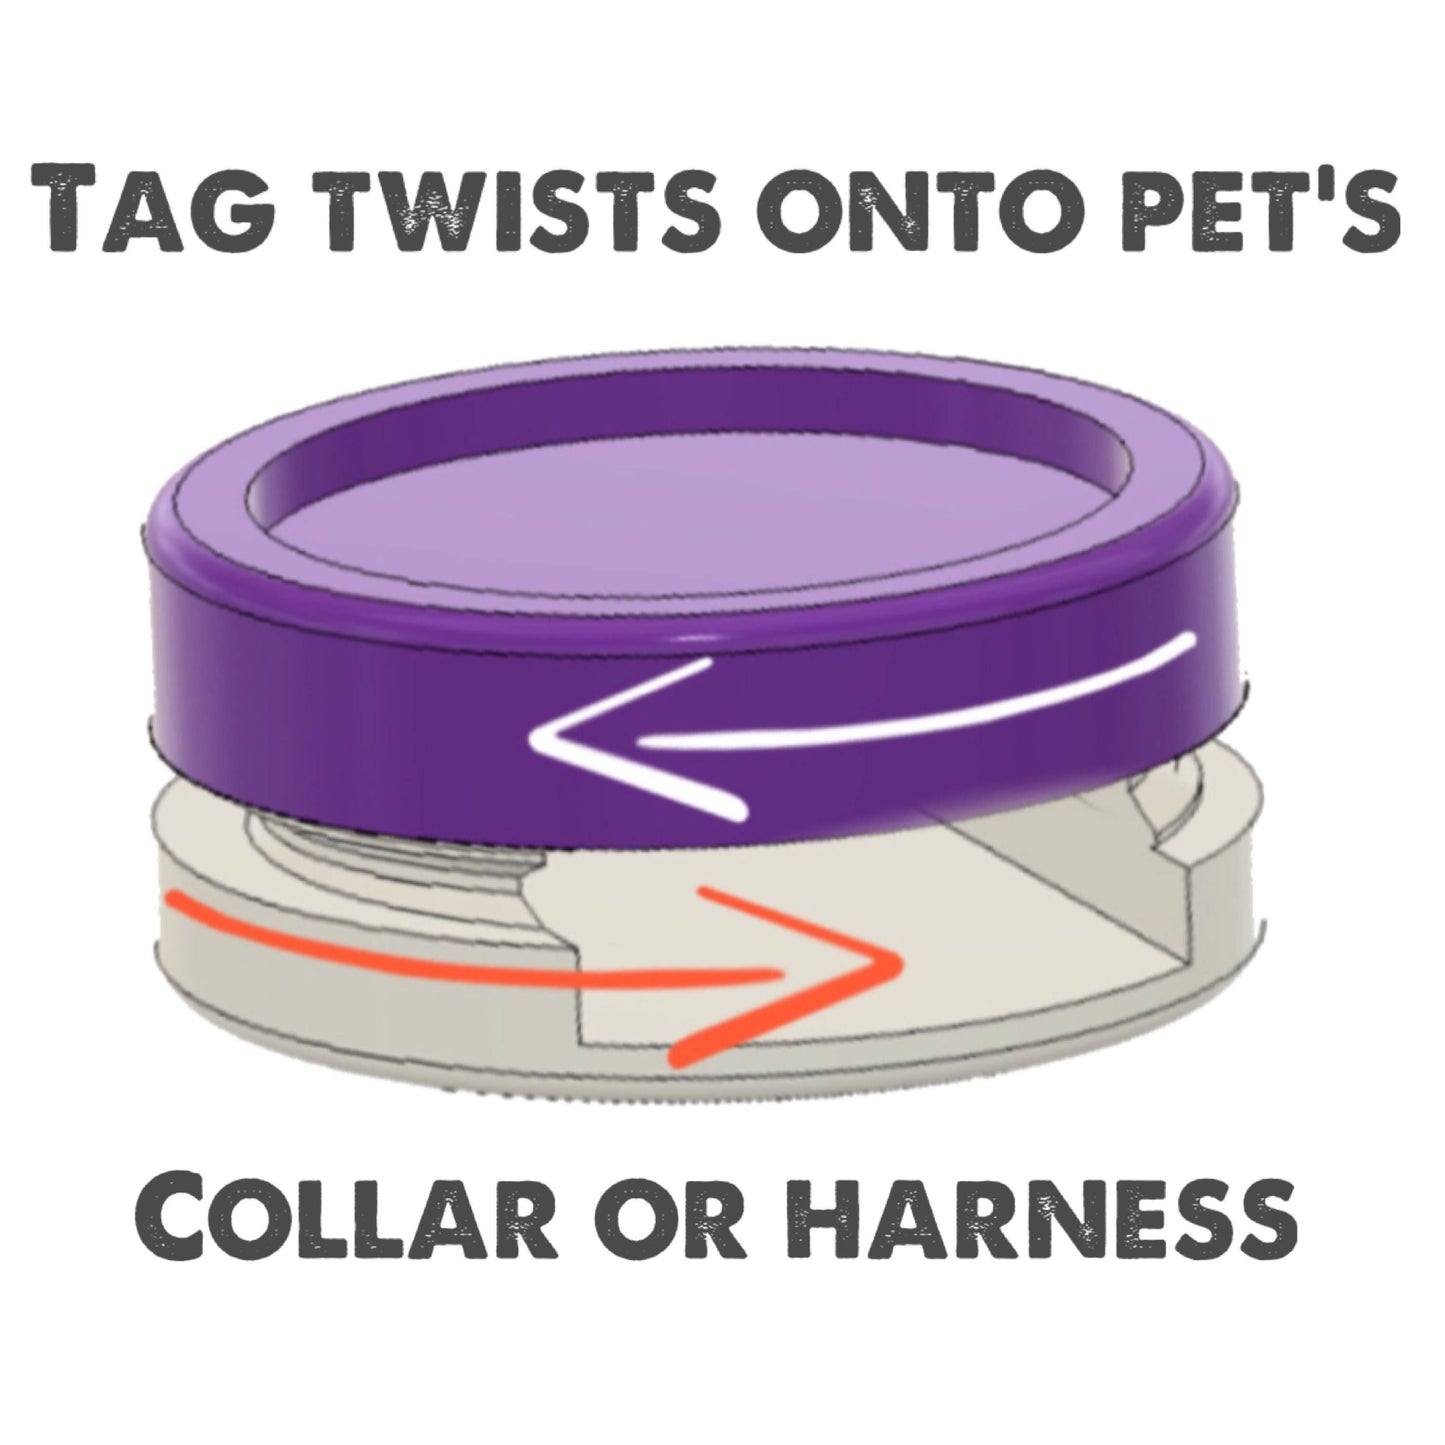 Cute Outdoorsy Pet ID • Silent Pet ID • Twist On Tag Silent, Eco-Friendly, Ringless twist-on Wood ID Tag for Cats and Dogs Trees Mountain